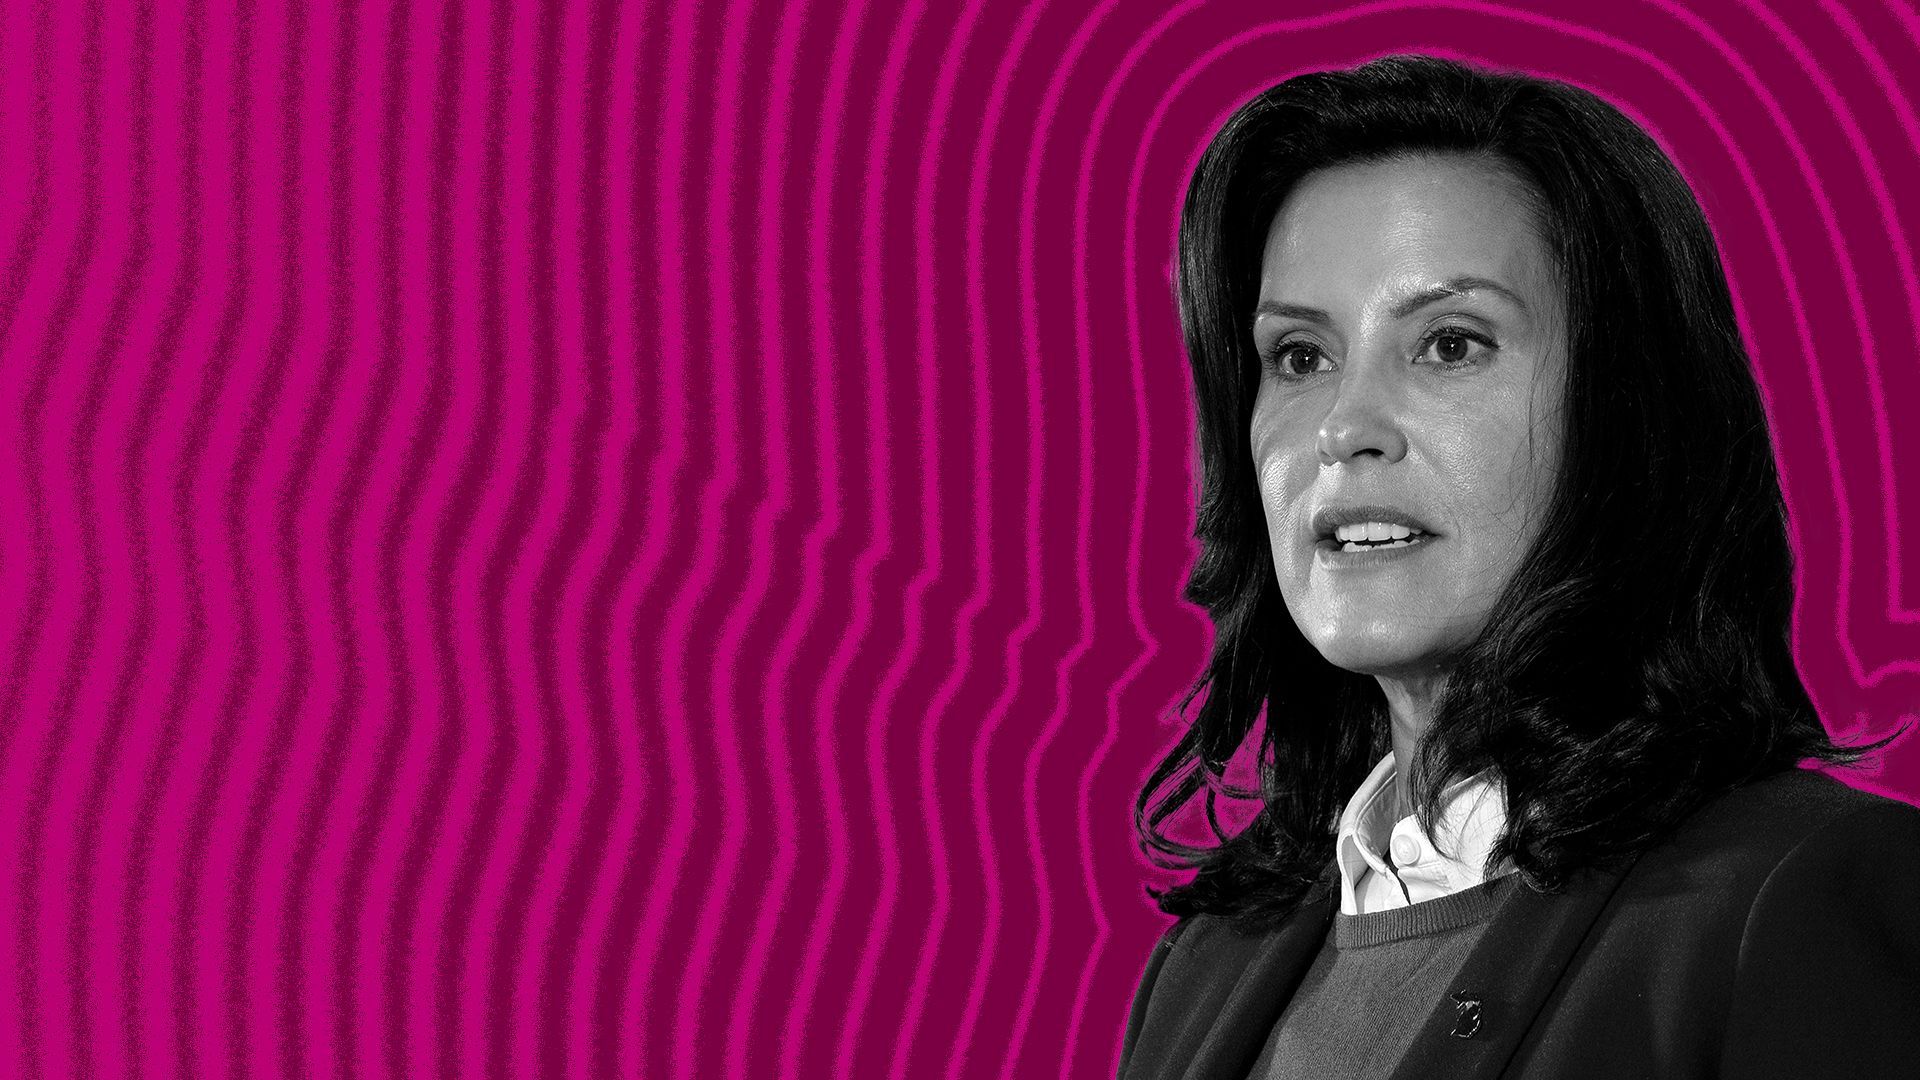 Illustration of Michigan governor, Gretchen Whitmer, with lines radiating from around her.